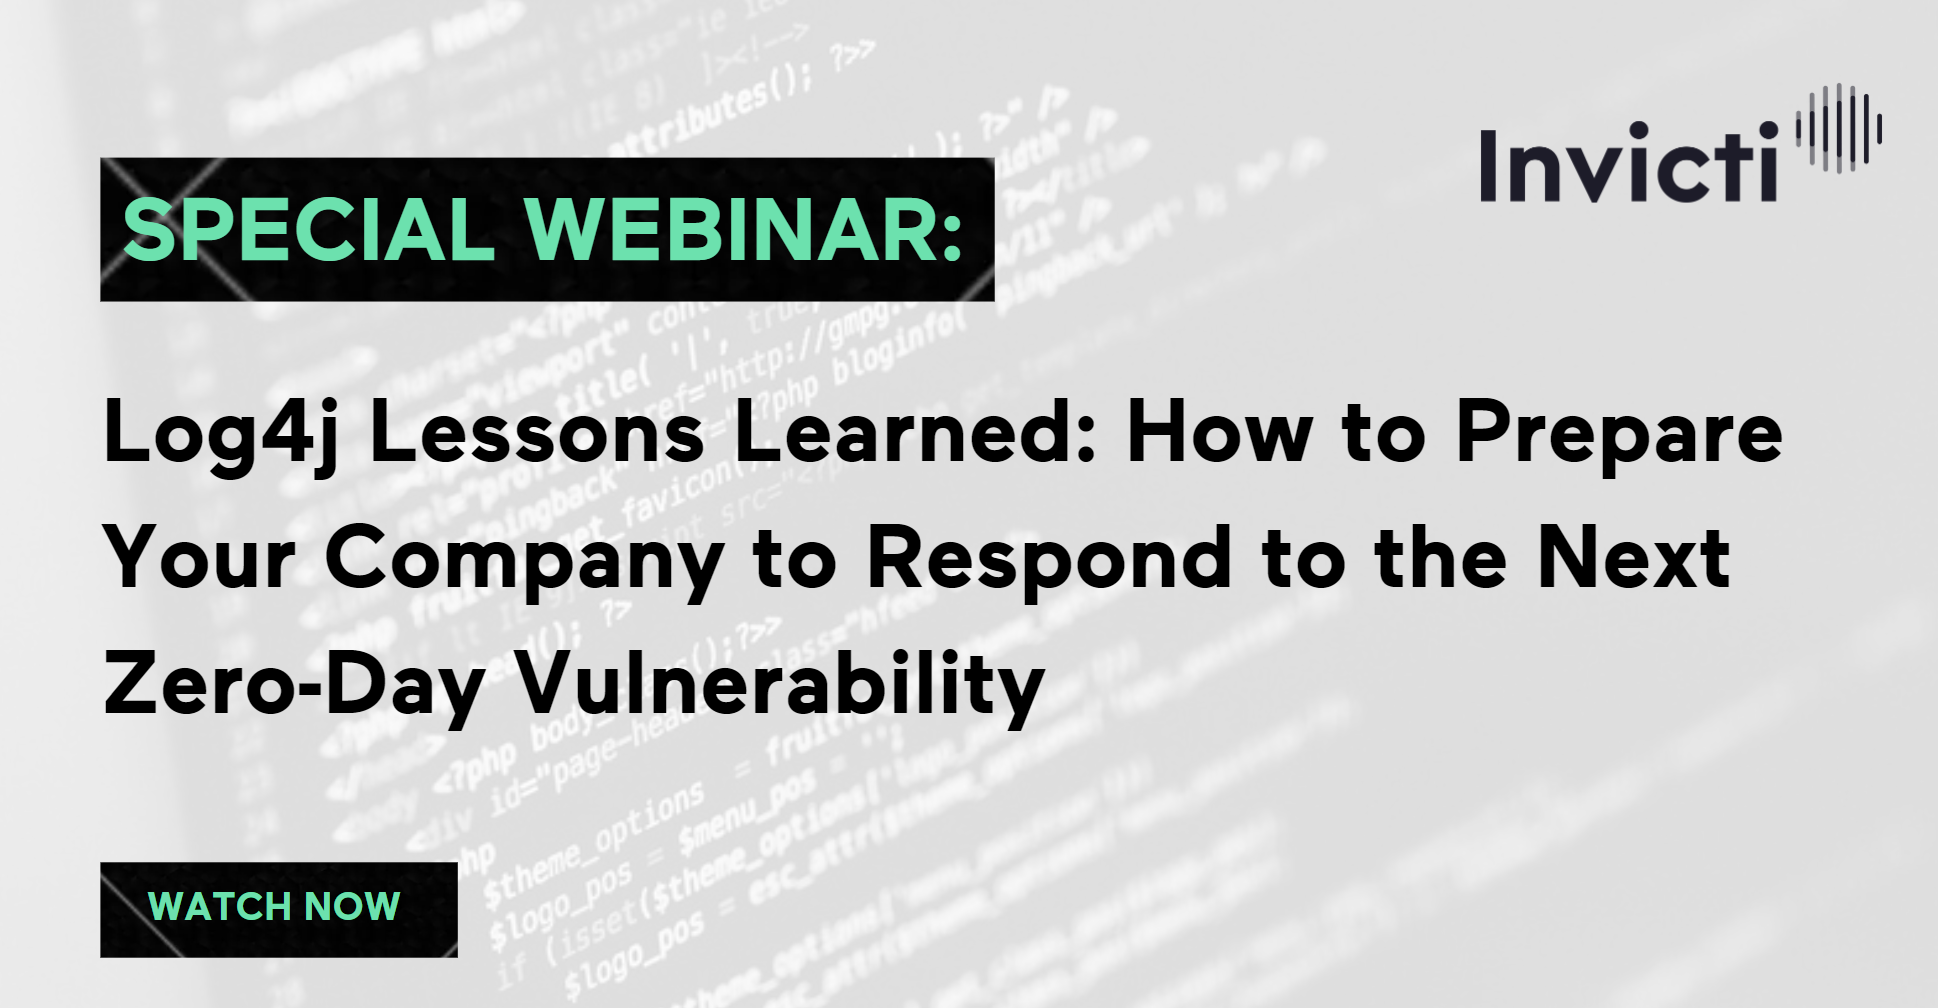 Log4j Lessons Learned: How to Prepare Your Company to Respond to the Next Zero-Day Vulnerability